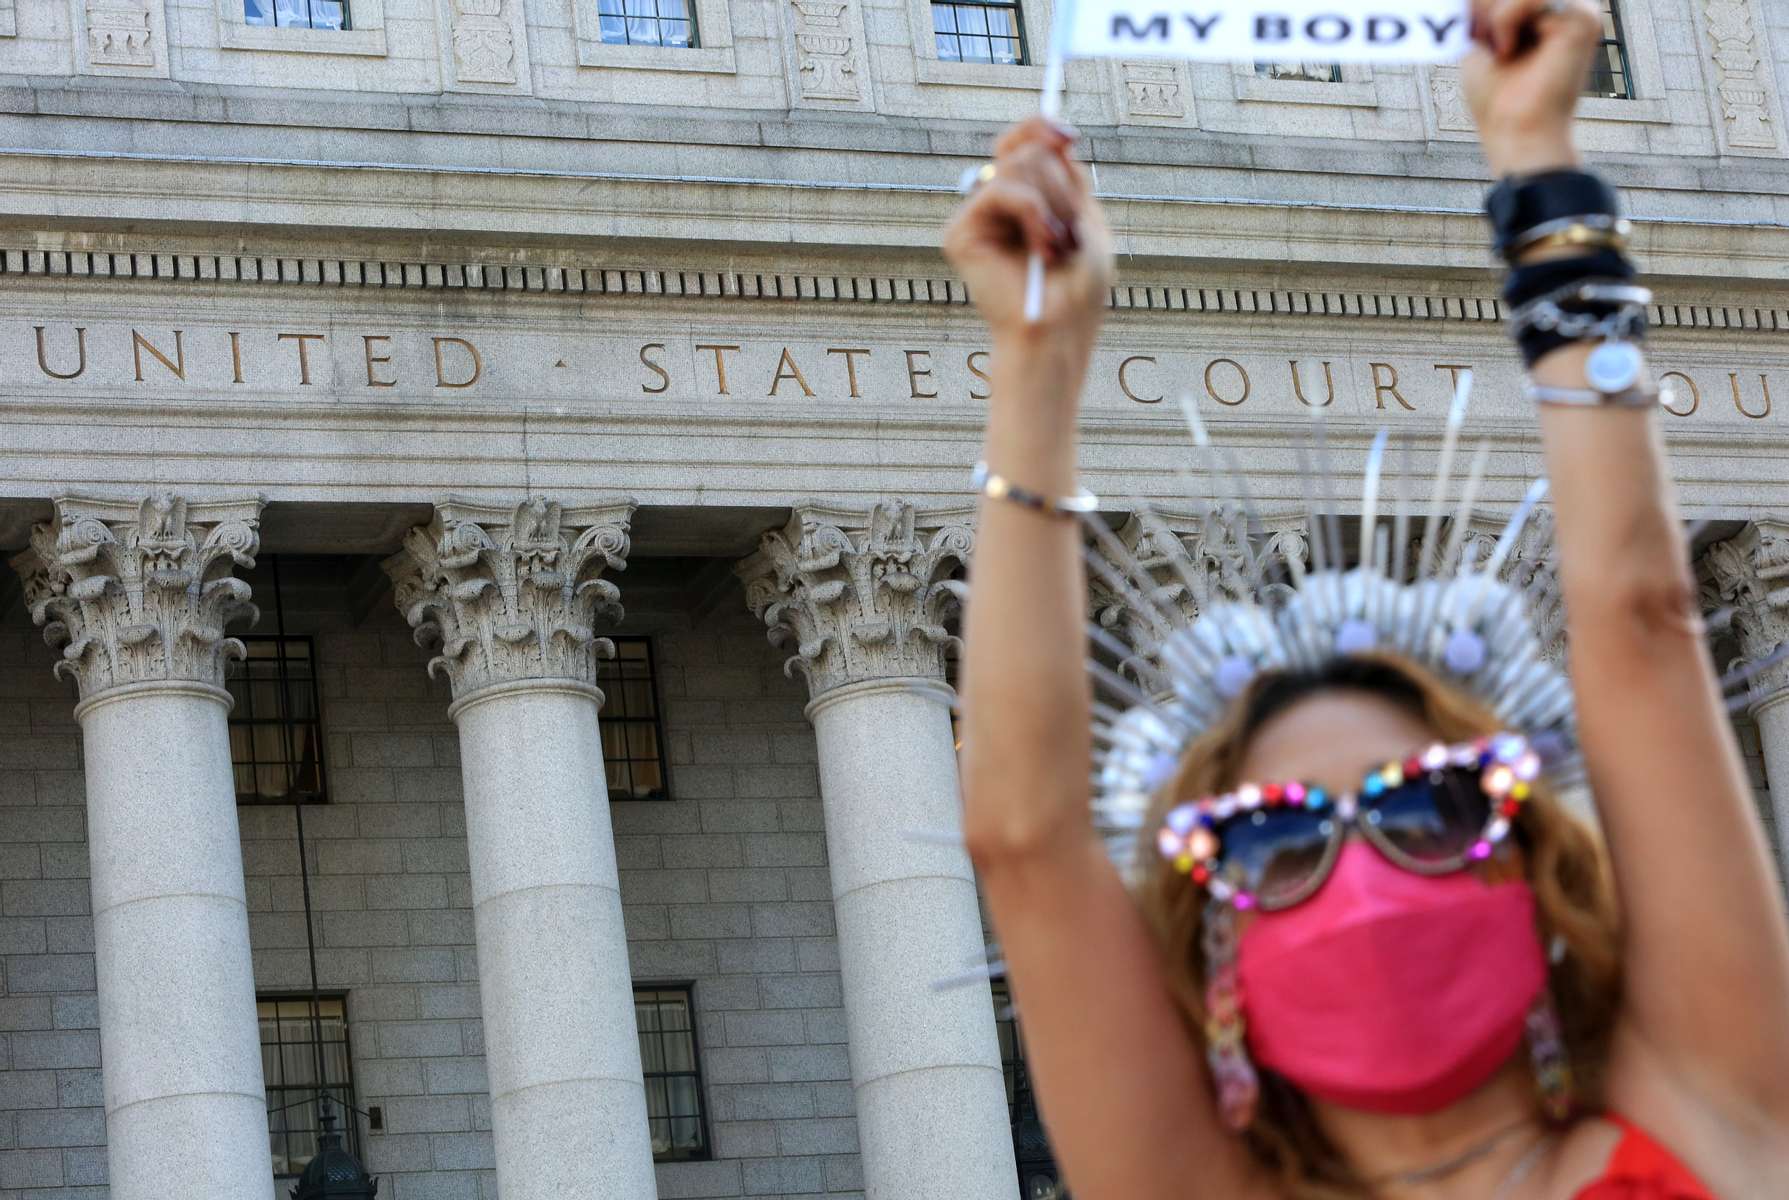 A woman holds up a sign as crowds gather in Foley Square in front of the United States Courthouse during the Women's March on October 2, 2021 in New York, NY. Marches were organized across the country to protest a new, restrictive Texas abortion law that bans most abortions at six weeks of pregnancy. 